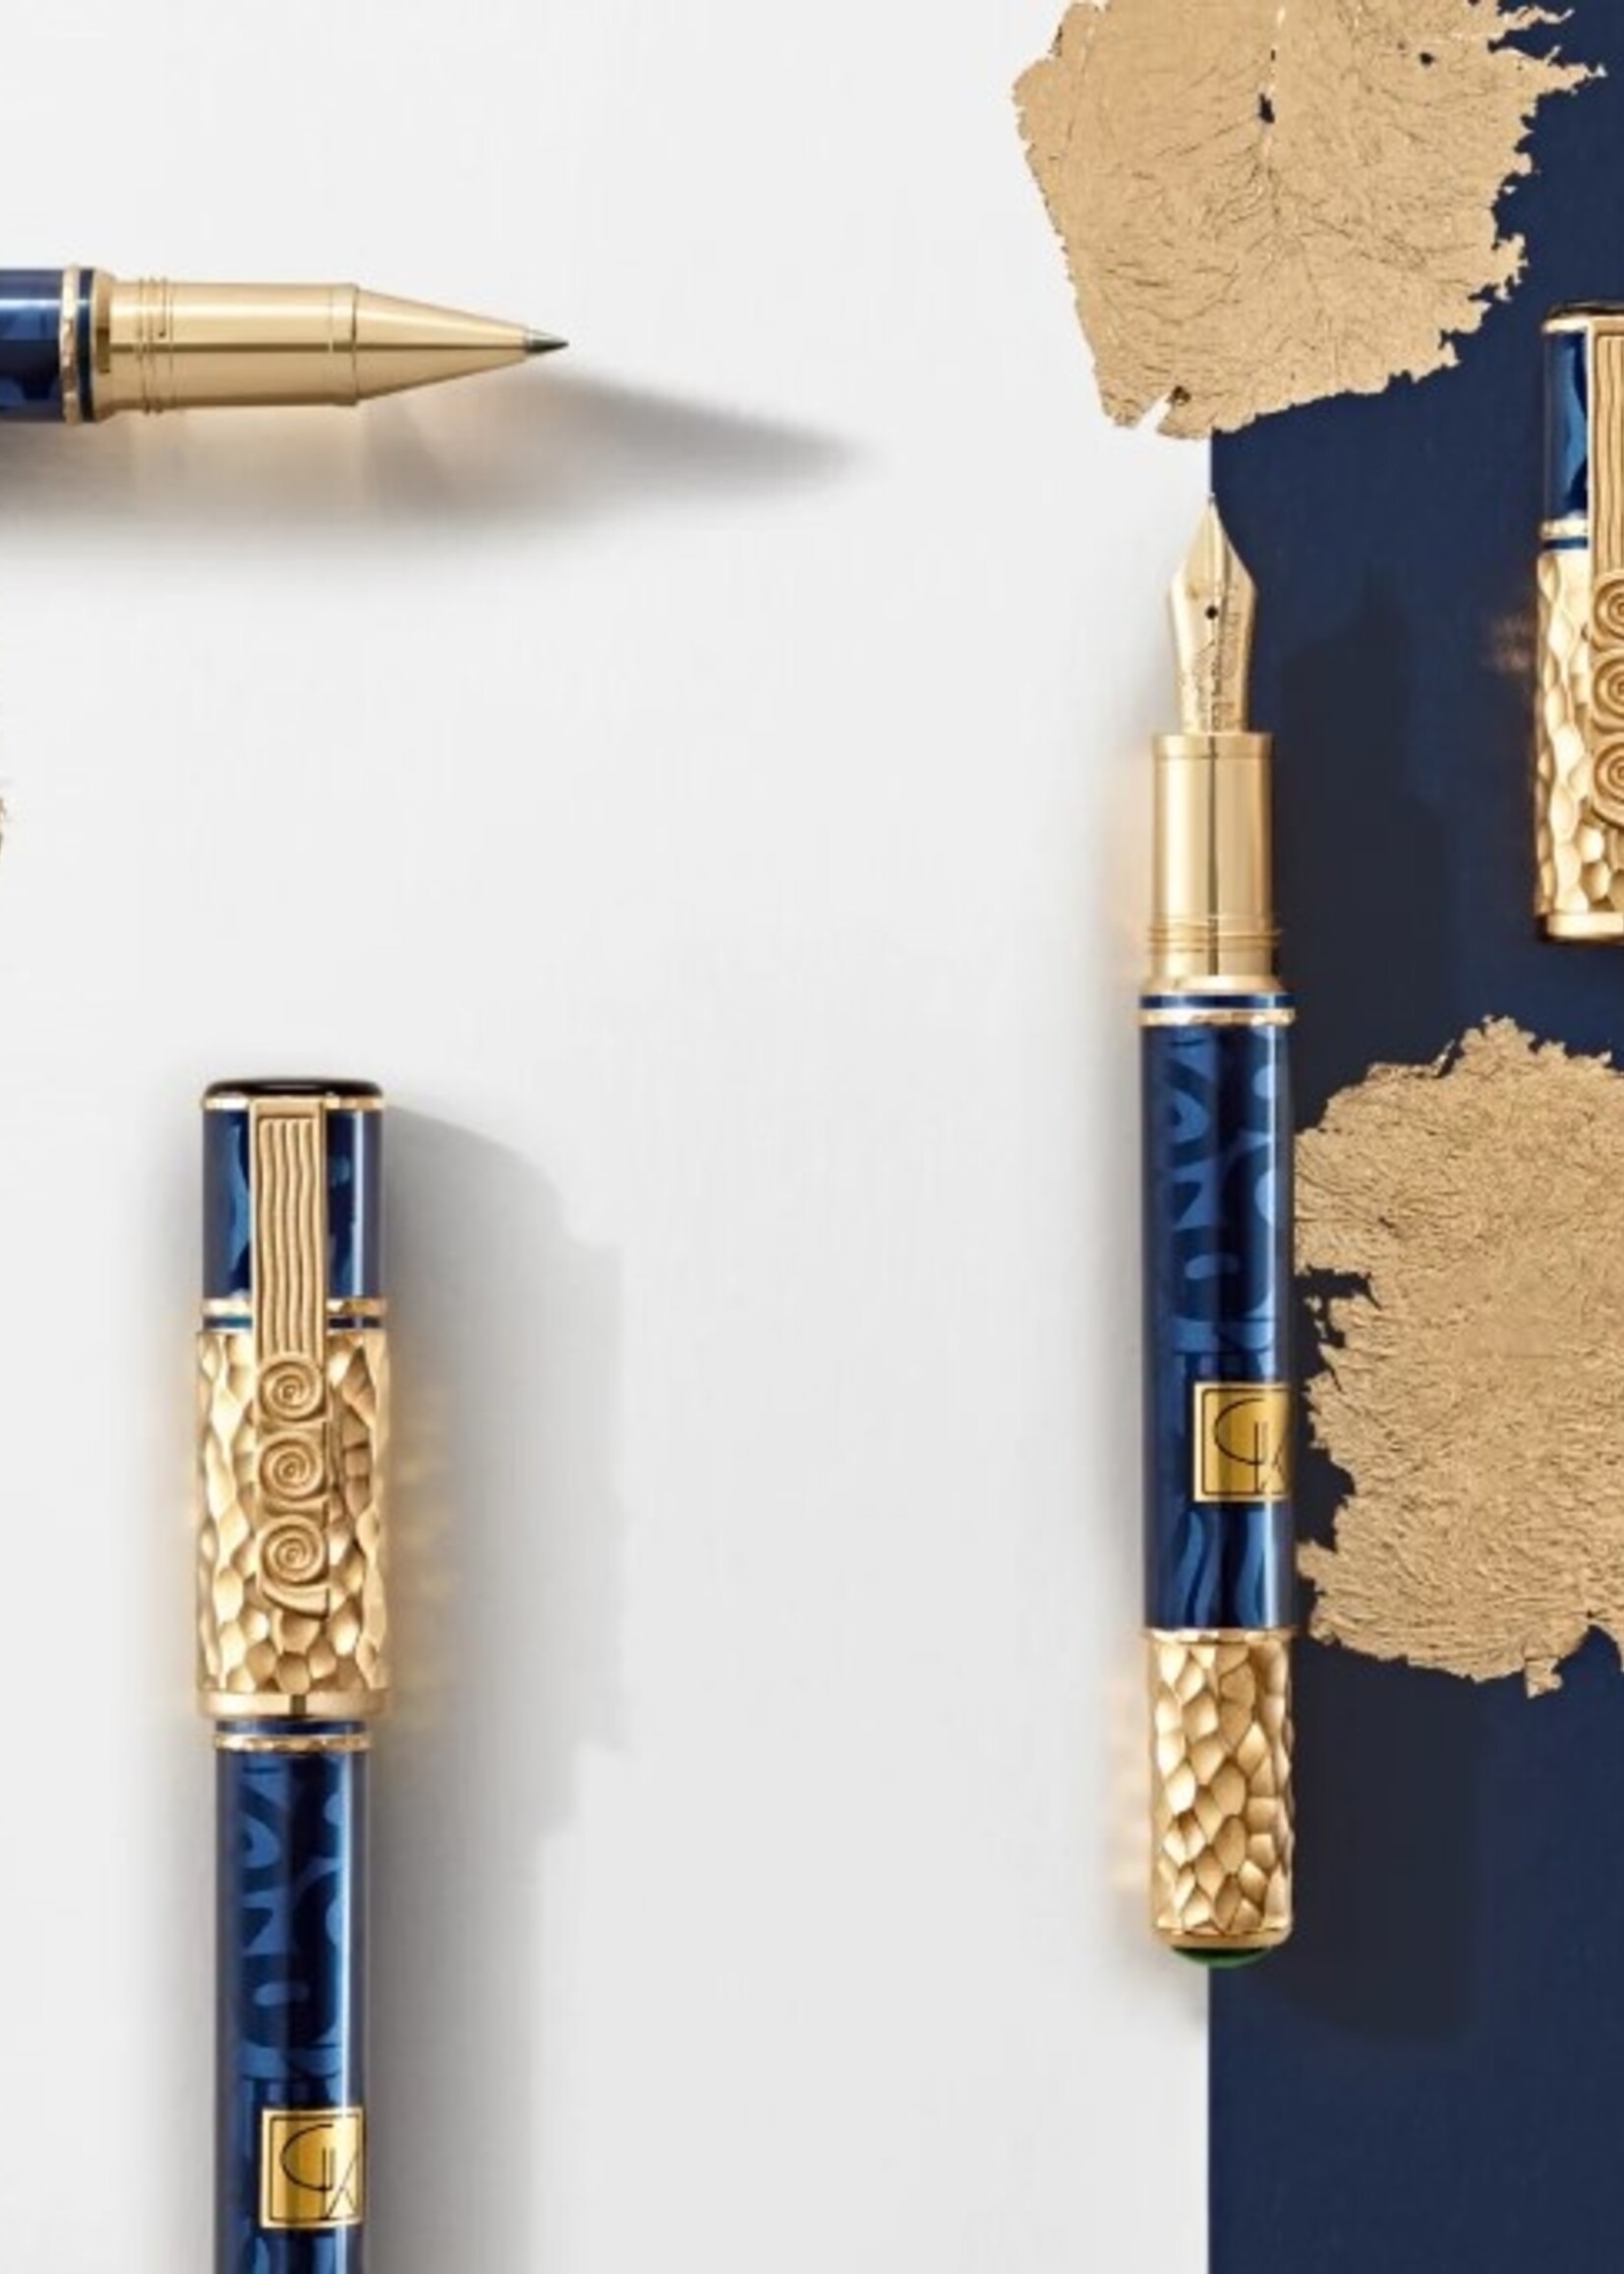 MONTBLANC Masters of Art '24 Homage to Gustav Klimt Limited Edition Notebook #146 small Lined